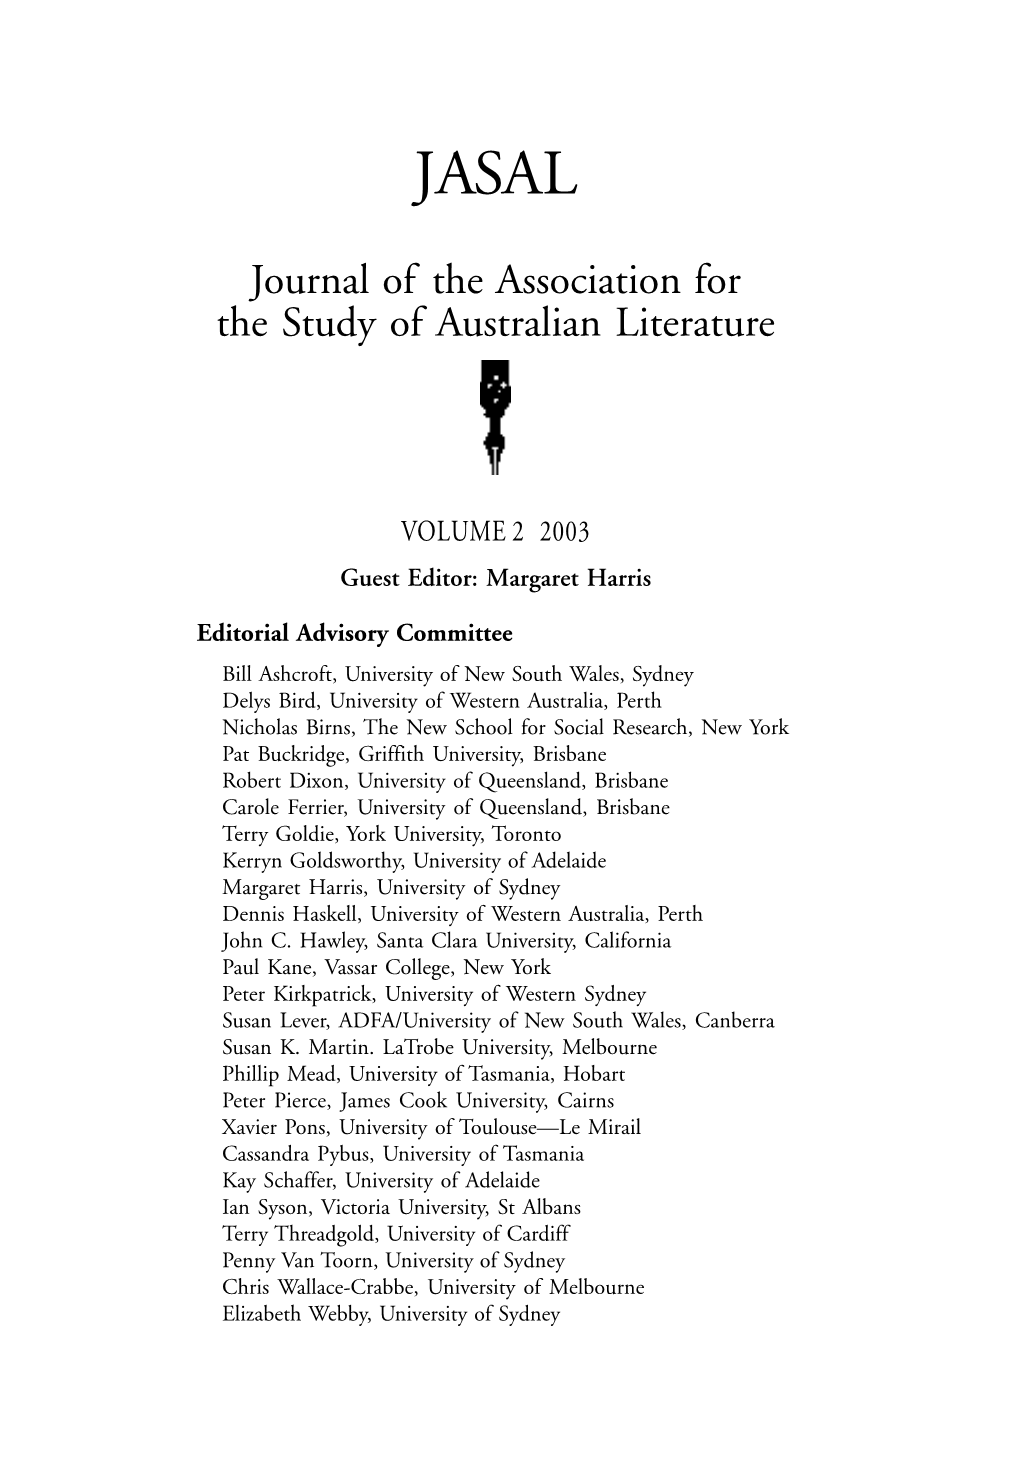 Journal of the Association for the Study of Australian Literature